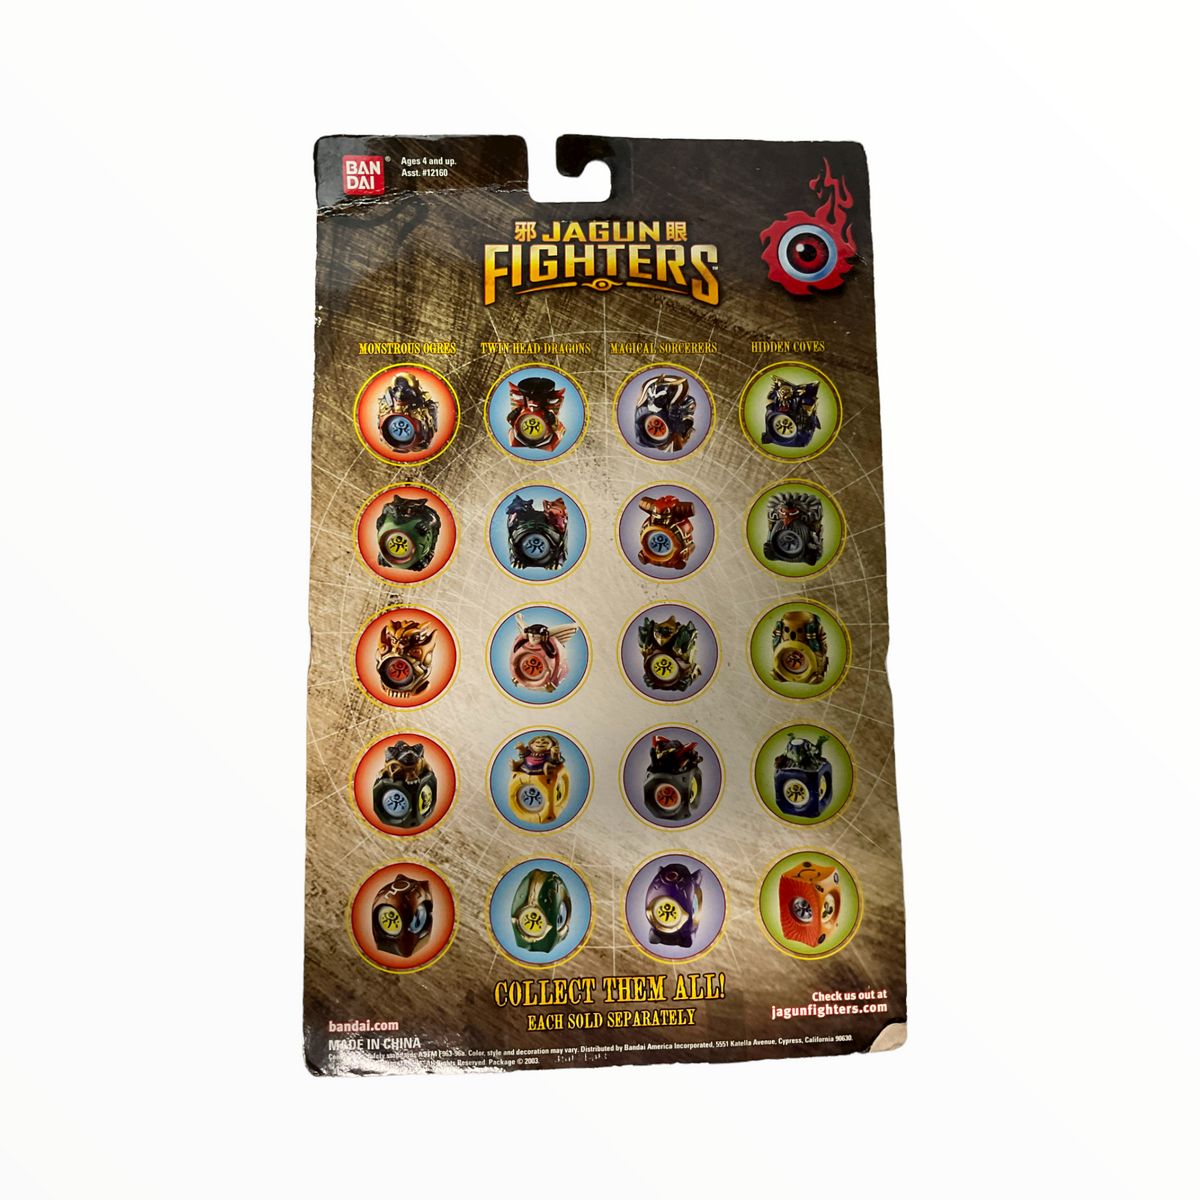 Ban Dai Jaguin Fighters Stone Fighter Pack Monstrous Ogres